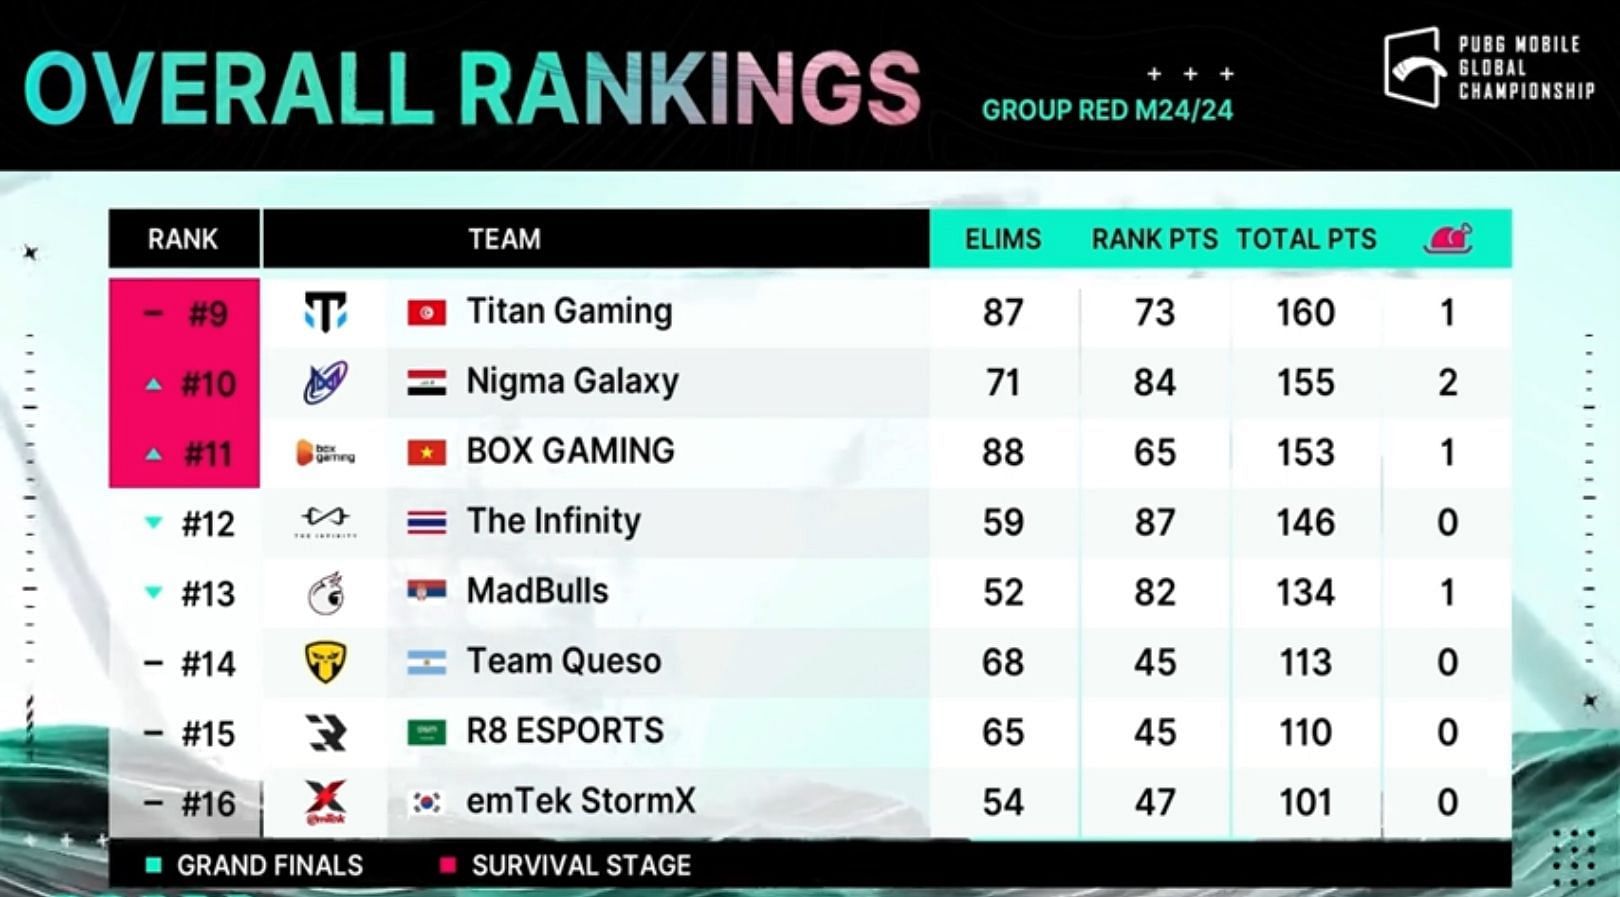 The Infinity came 12th in PMGC Group Red (Image via PUBG Mobile)